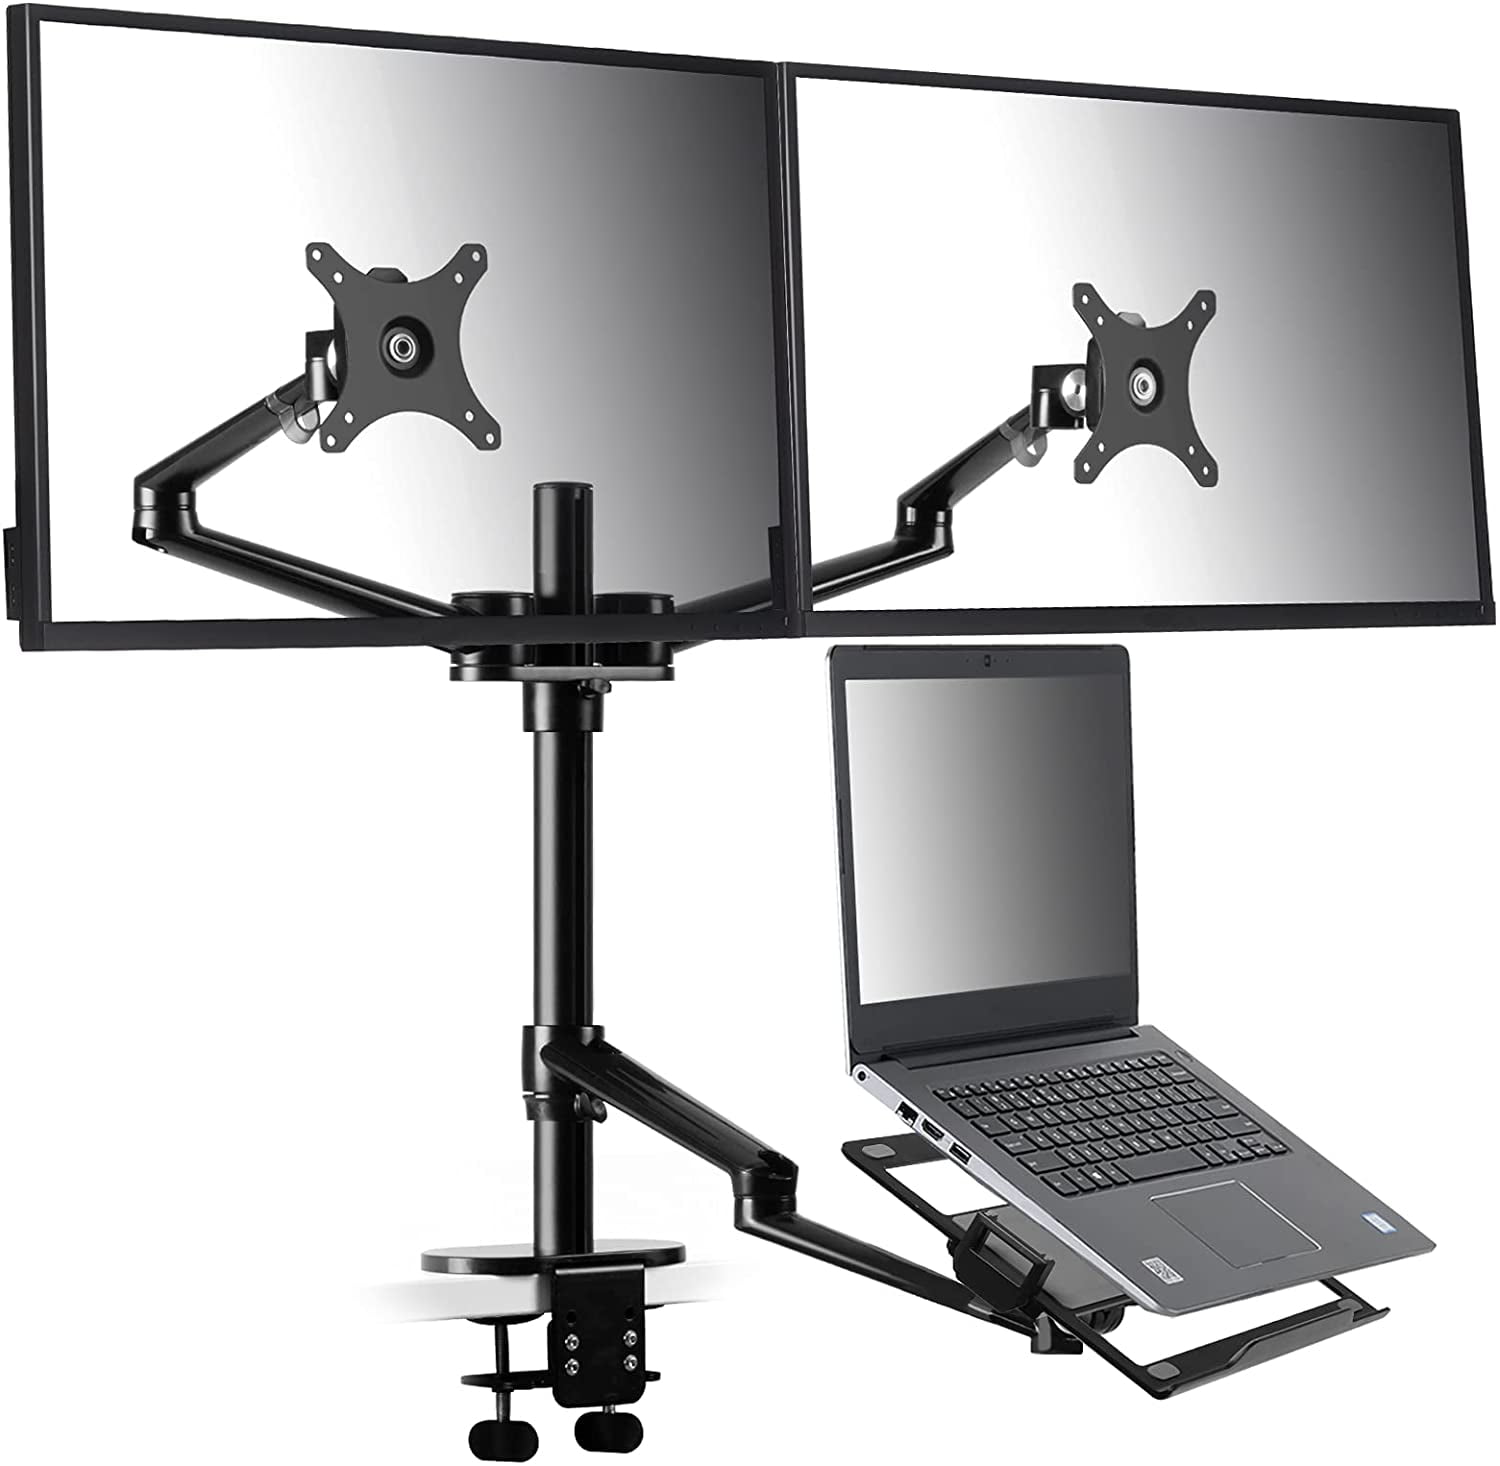 Kansen Goederen Doordeweekse dagen Monitor and Laptop Mount 3-in-1 Adjustable Triple Monitor Arm Desk Mounts  Dual Desk Arm Stand/Holder for 17 to 27 Inch LCD Computer Screens Extra  Tray Fits 12 to 17 inch Laptops -B - Walmart.com